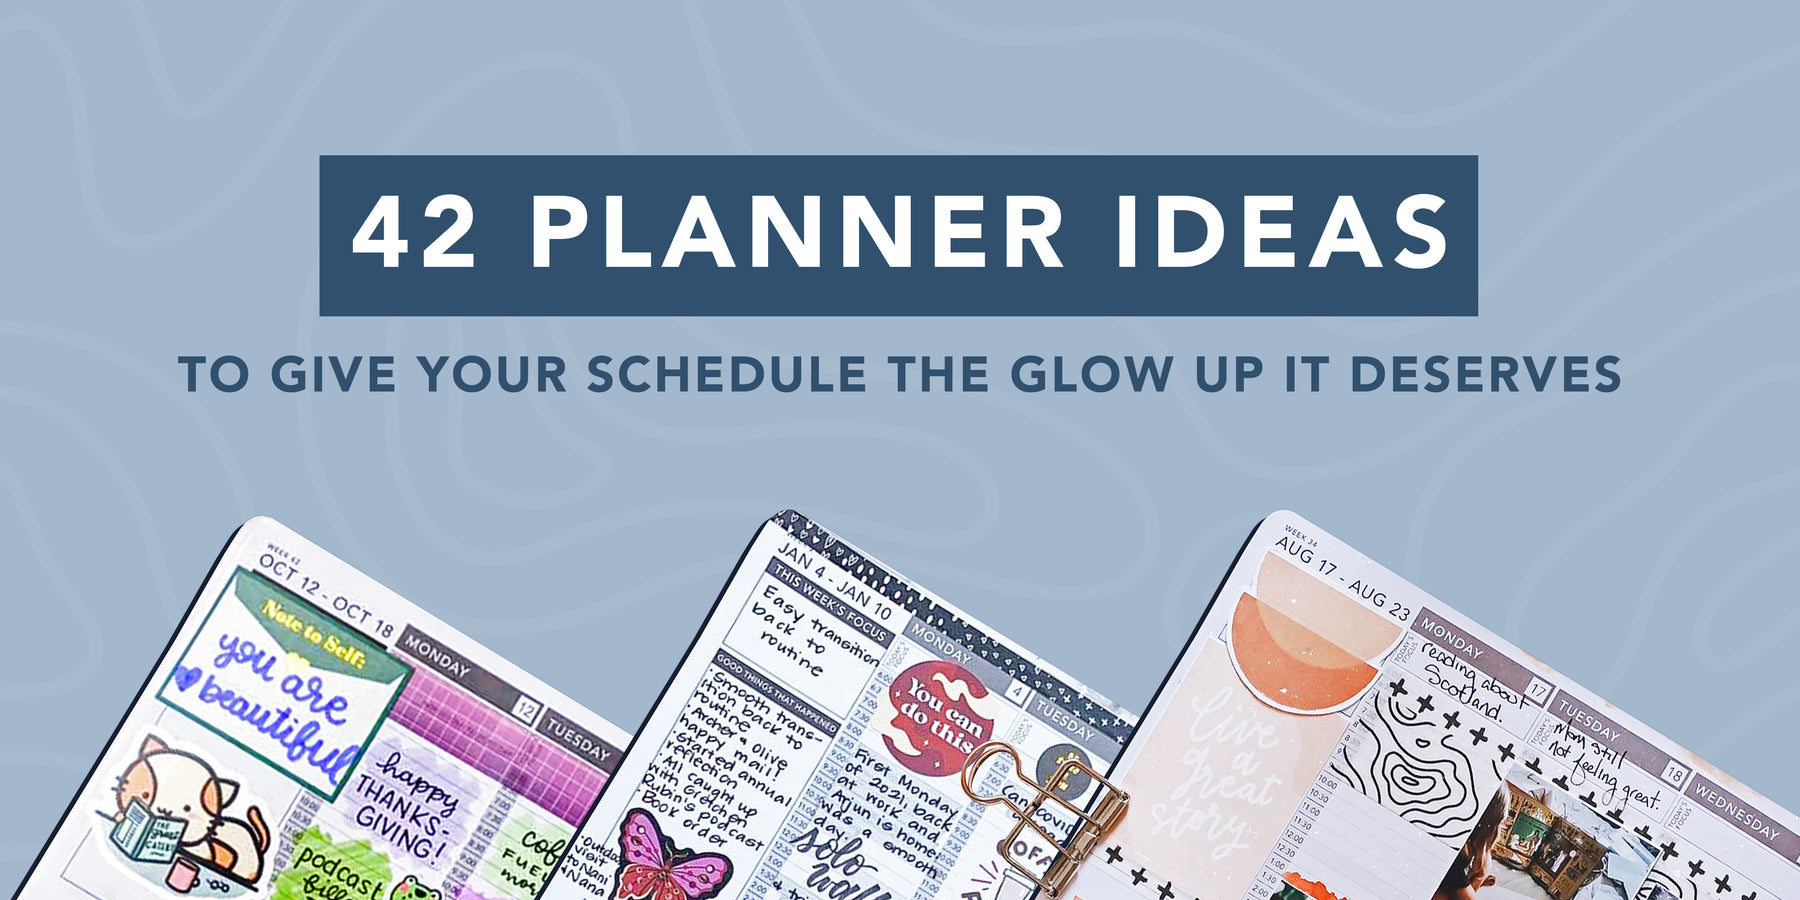 42 Planner Ideas to Give Your Schedule the Glow Up It Deserves